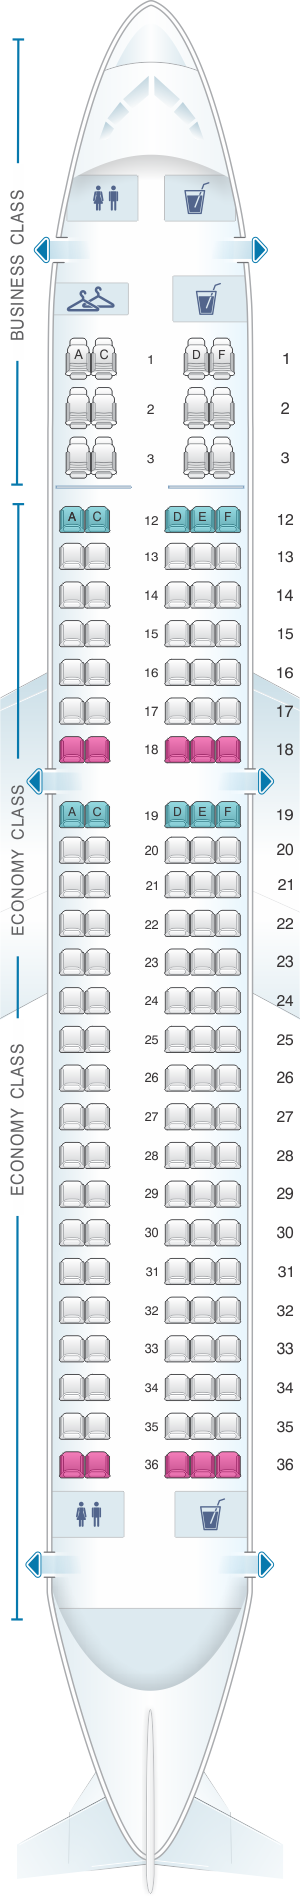 Seat map for Air Canada Airbus A220 300